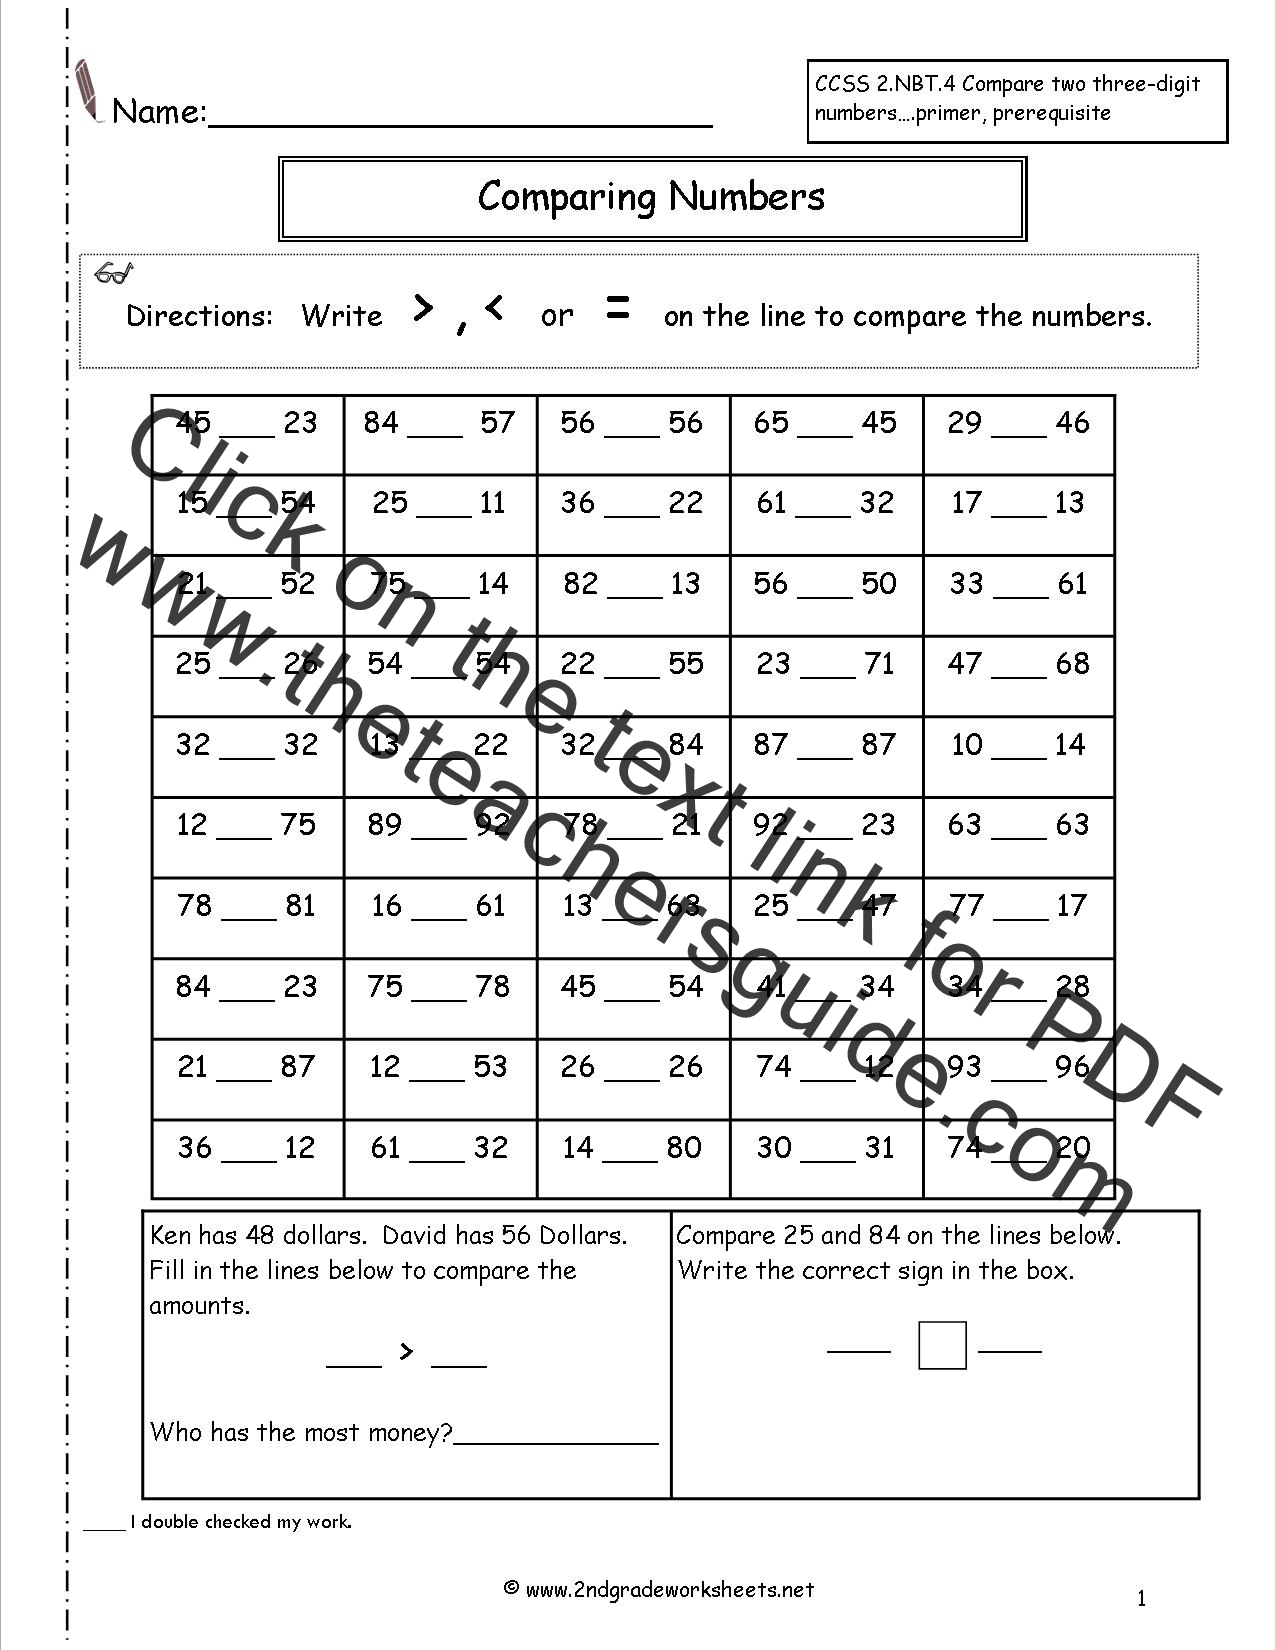 comparing-three-digit-numbers-math-worksheet-twisty-noodle-comparing-numbers-3-digits